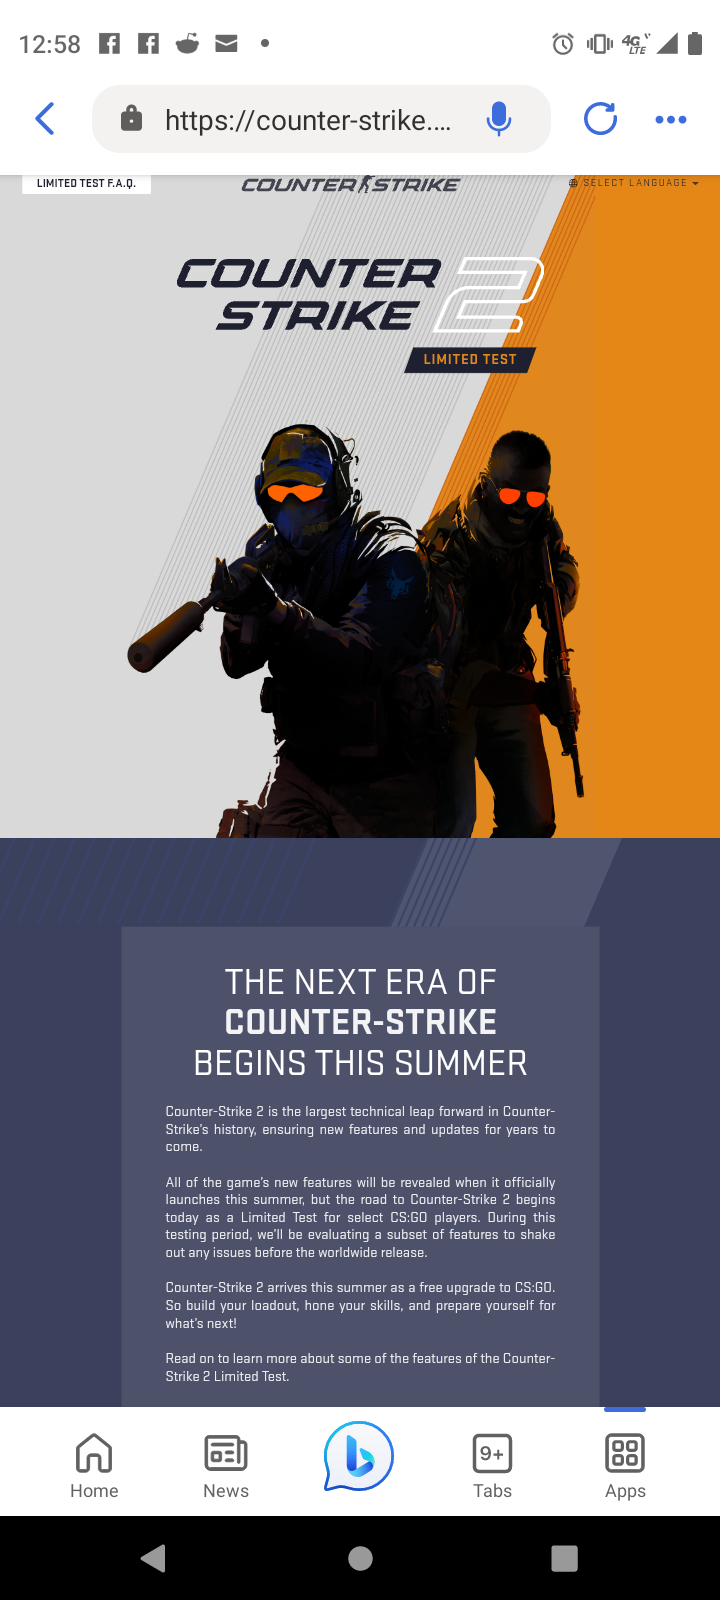 Counter-Strike 2 Release Date Revealed!